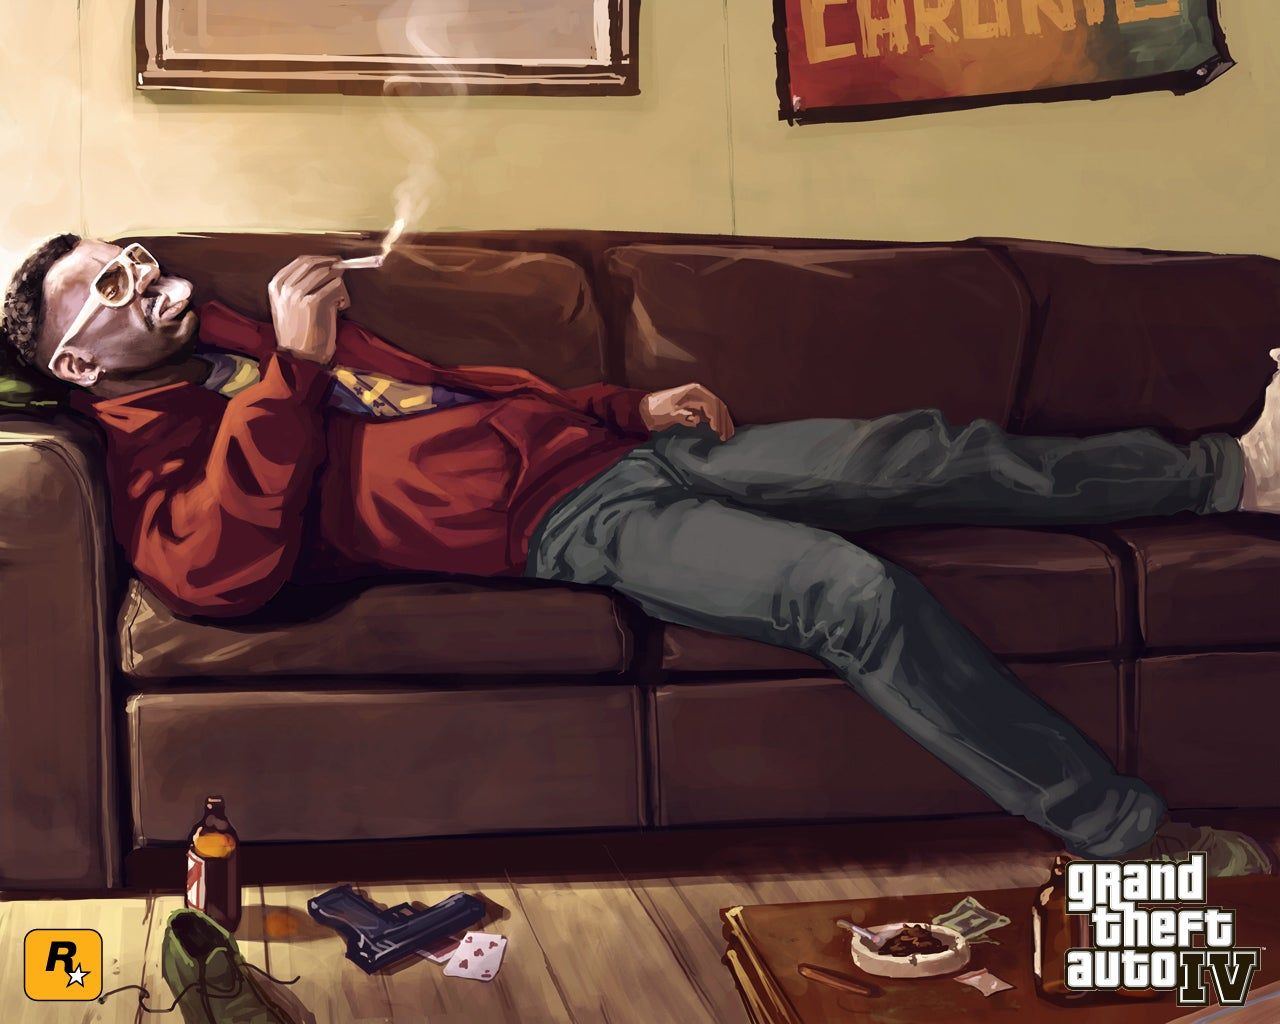 In my opinion one of the best GTA charcters, i loved little Jacob in GTA IV